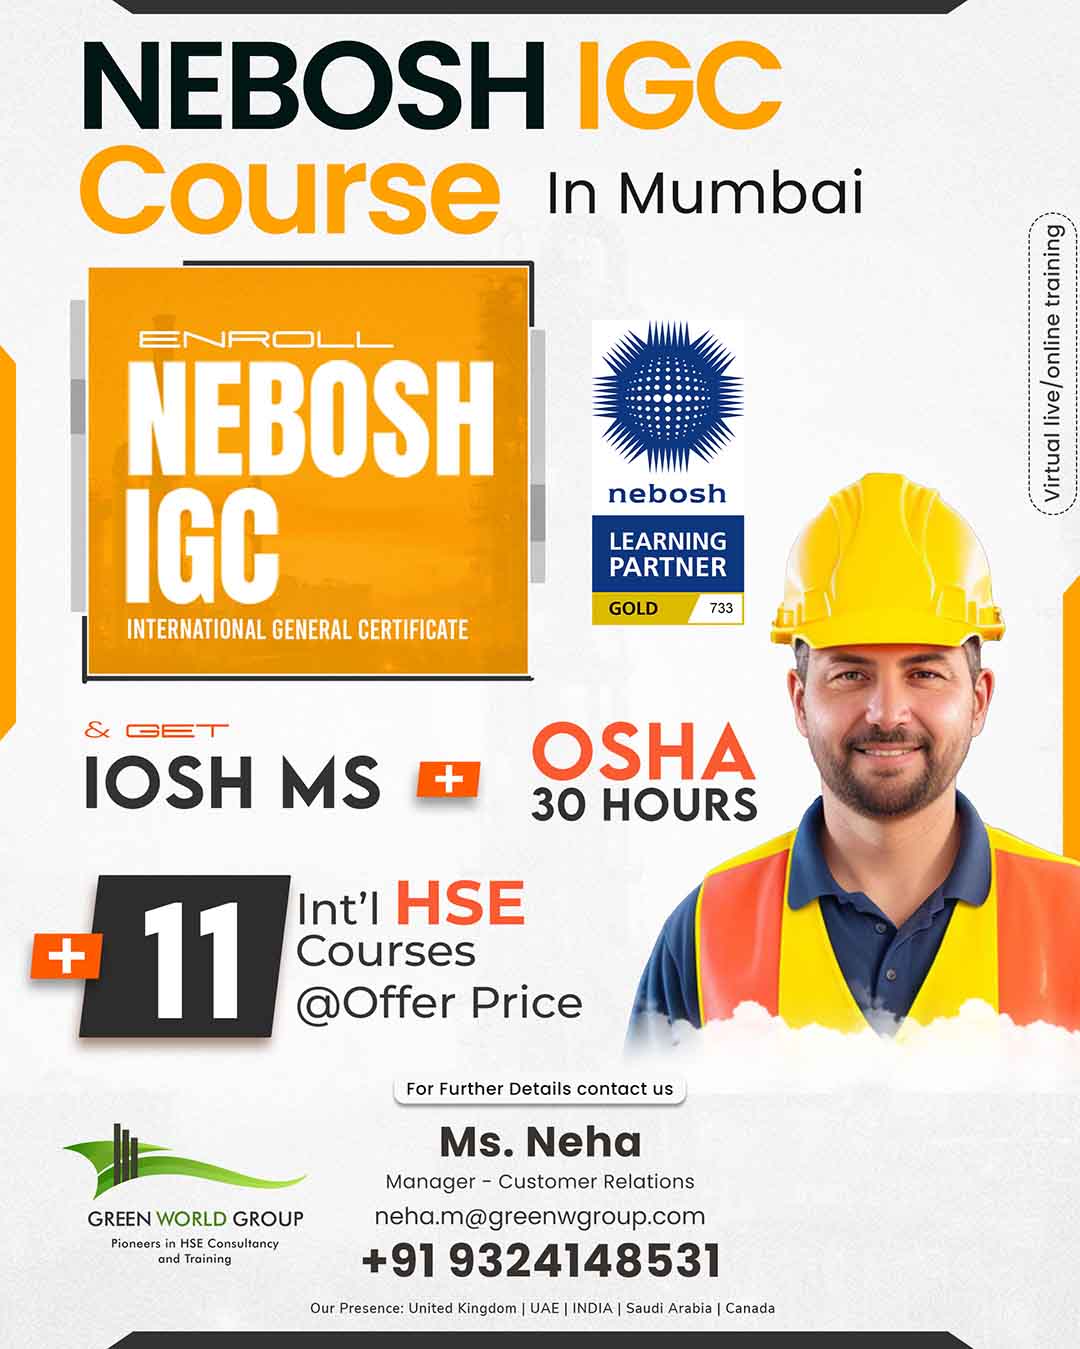 You are currently viewing GWG’s Offer for Nebosh IGC at Kolkata – FROM GWG !!